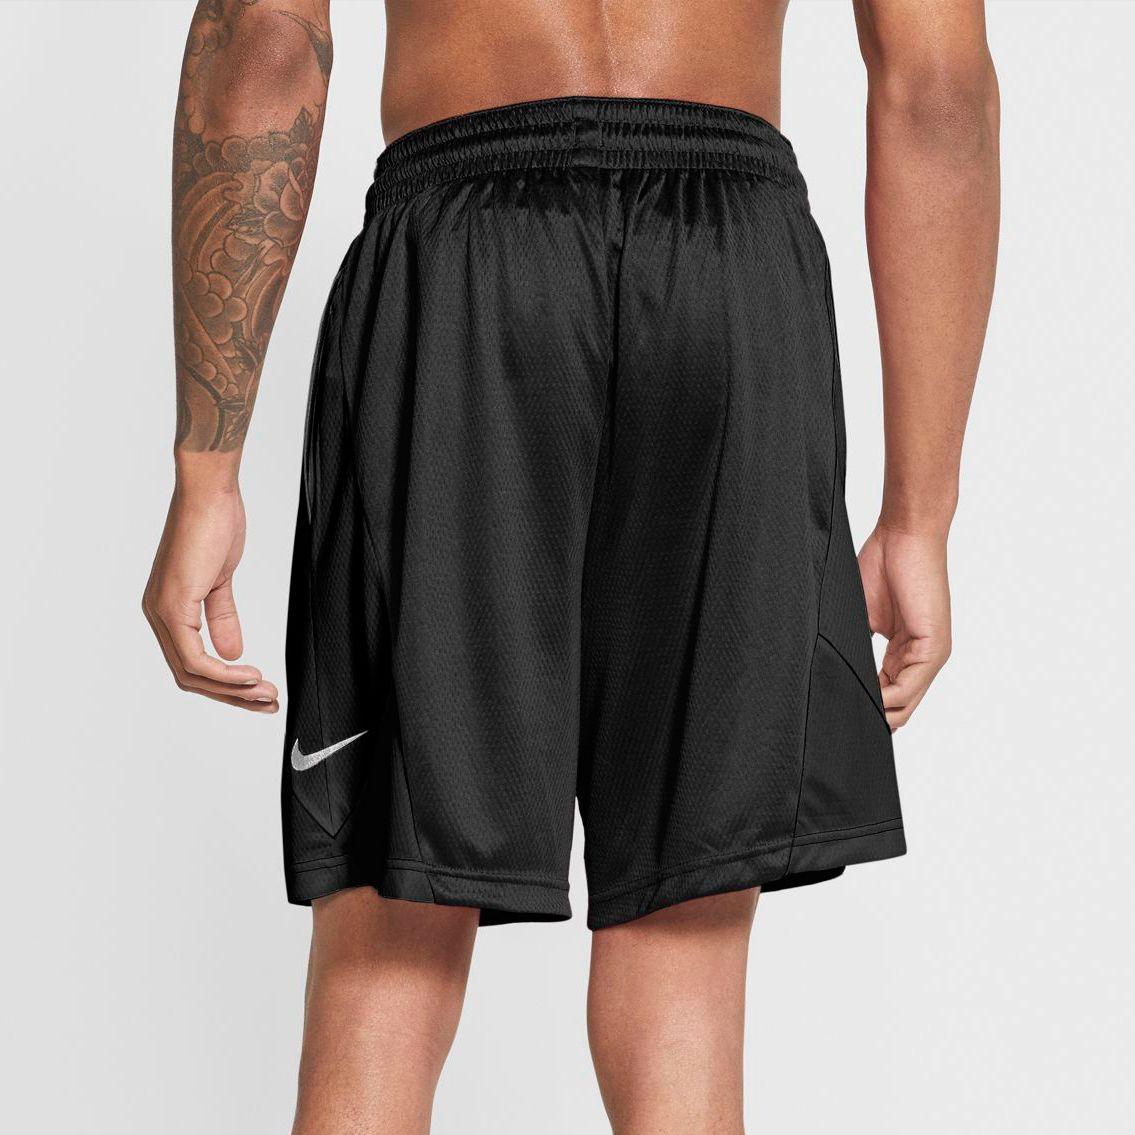 Nike Dri-fit Rival 9'' Basketball Shorts in Black for Men - Lyst